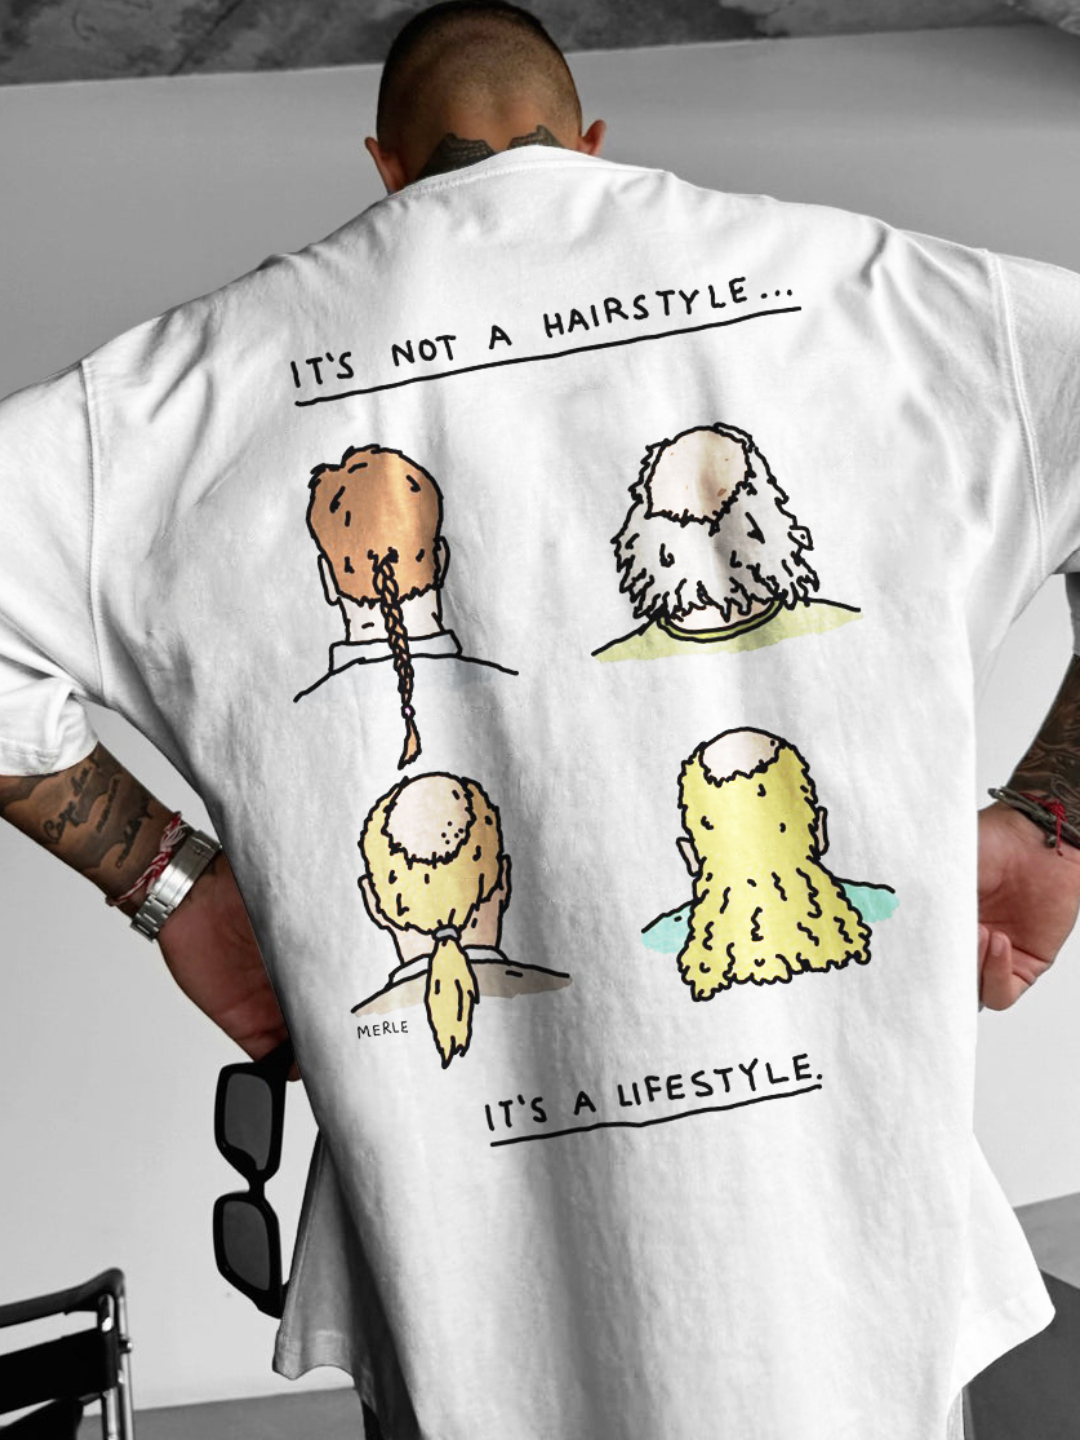 "It's not a hairstyle, It's a lifestyle." Skate T-shirt